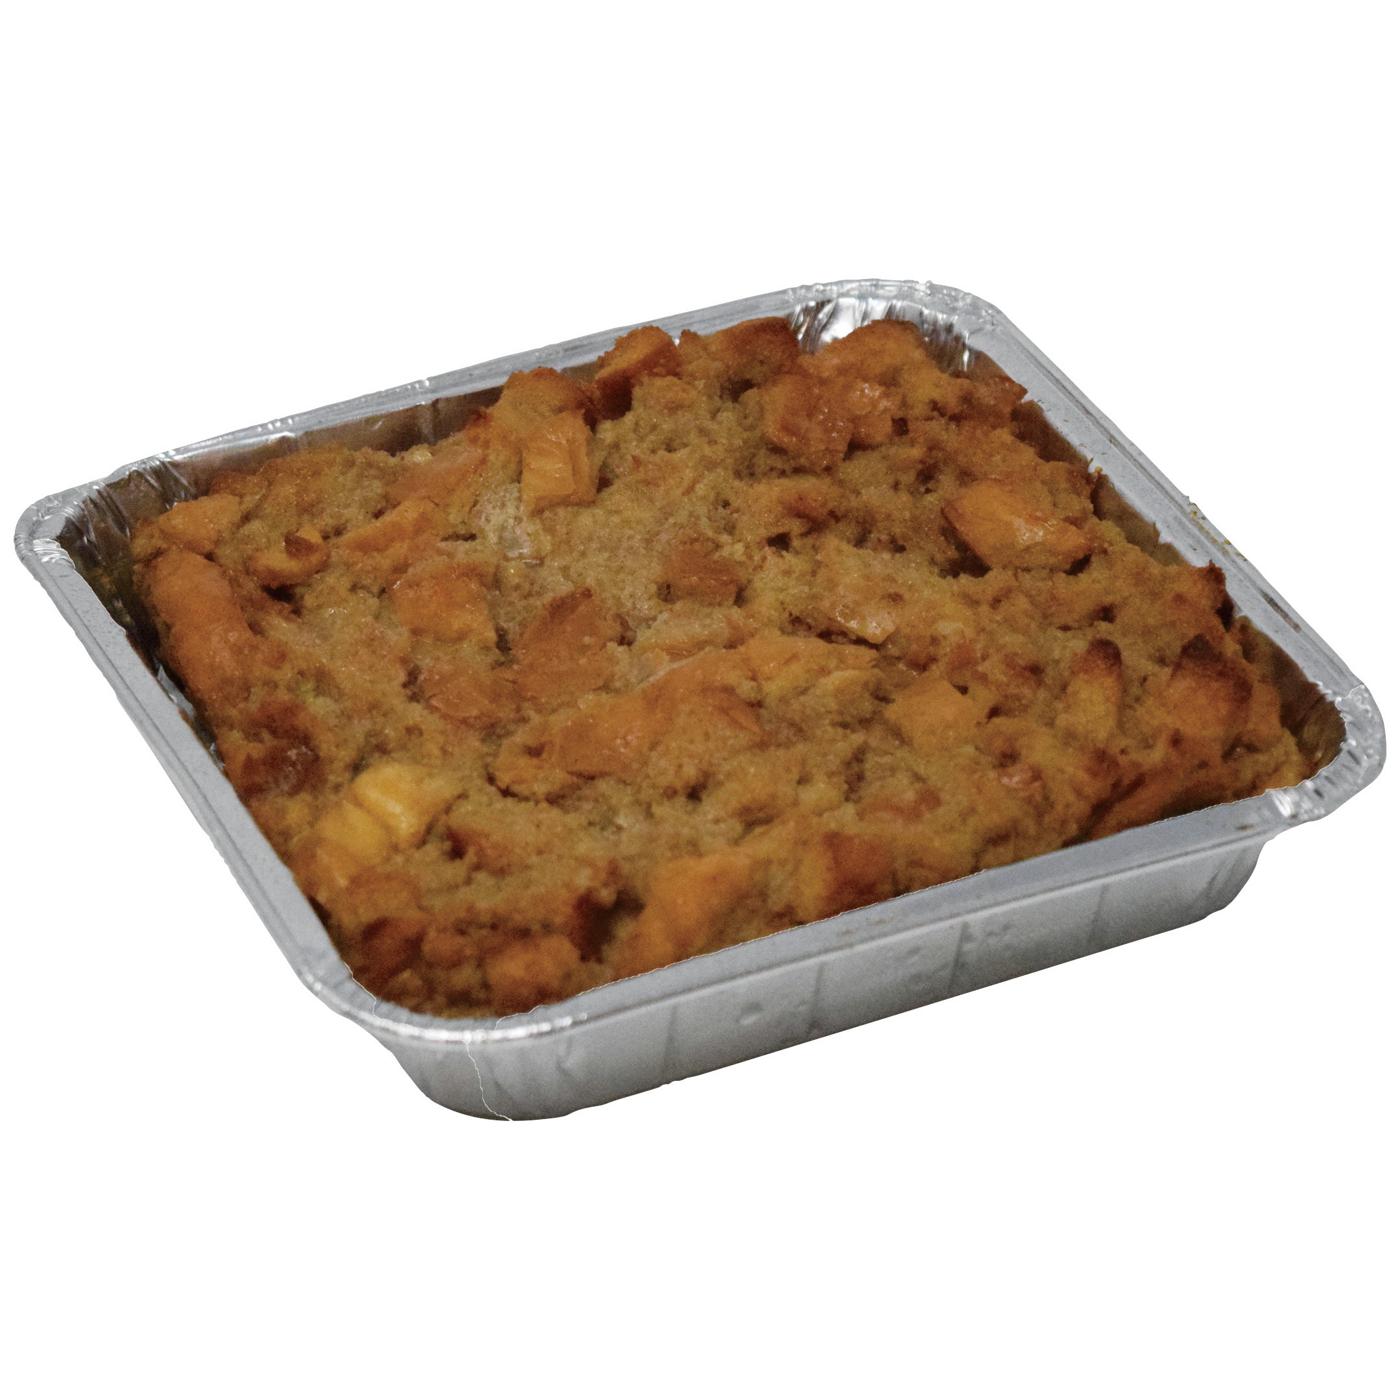 H-E-B Bakery Bread Pudding (Sold Cold); image 2 of 2